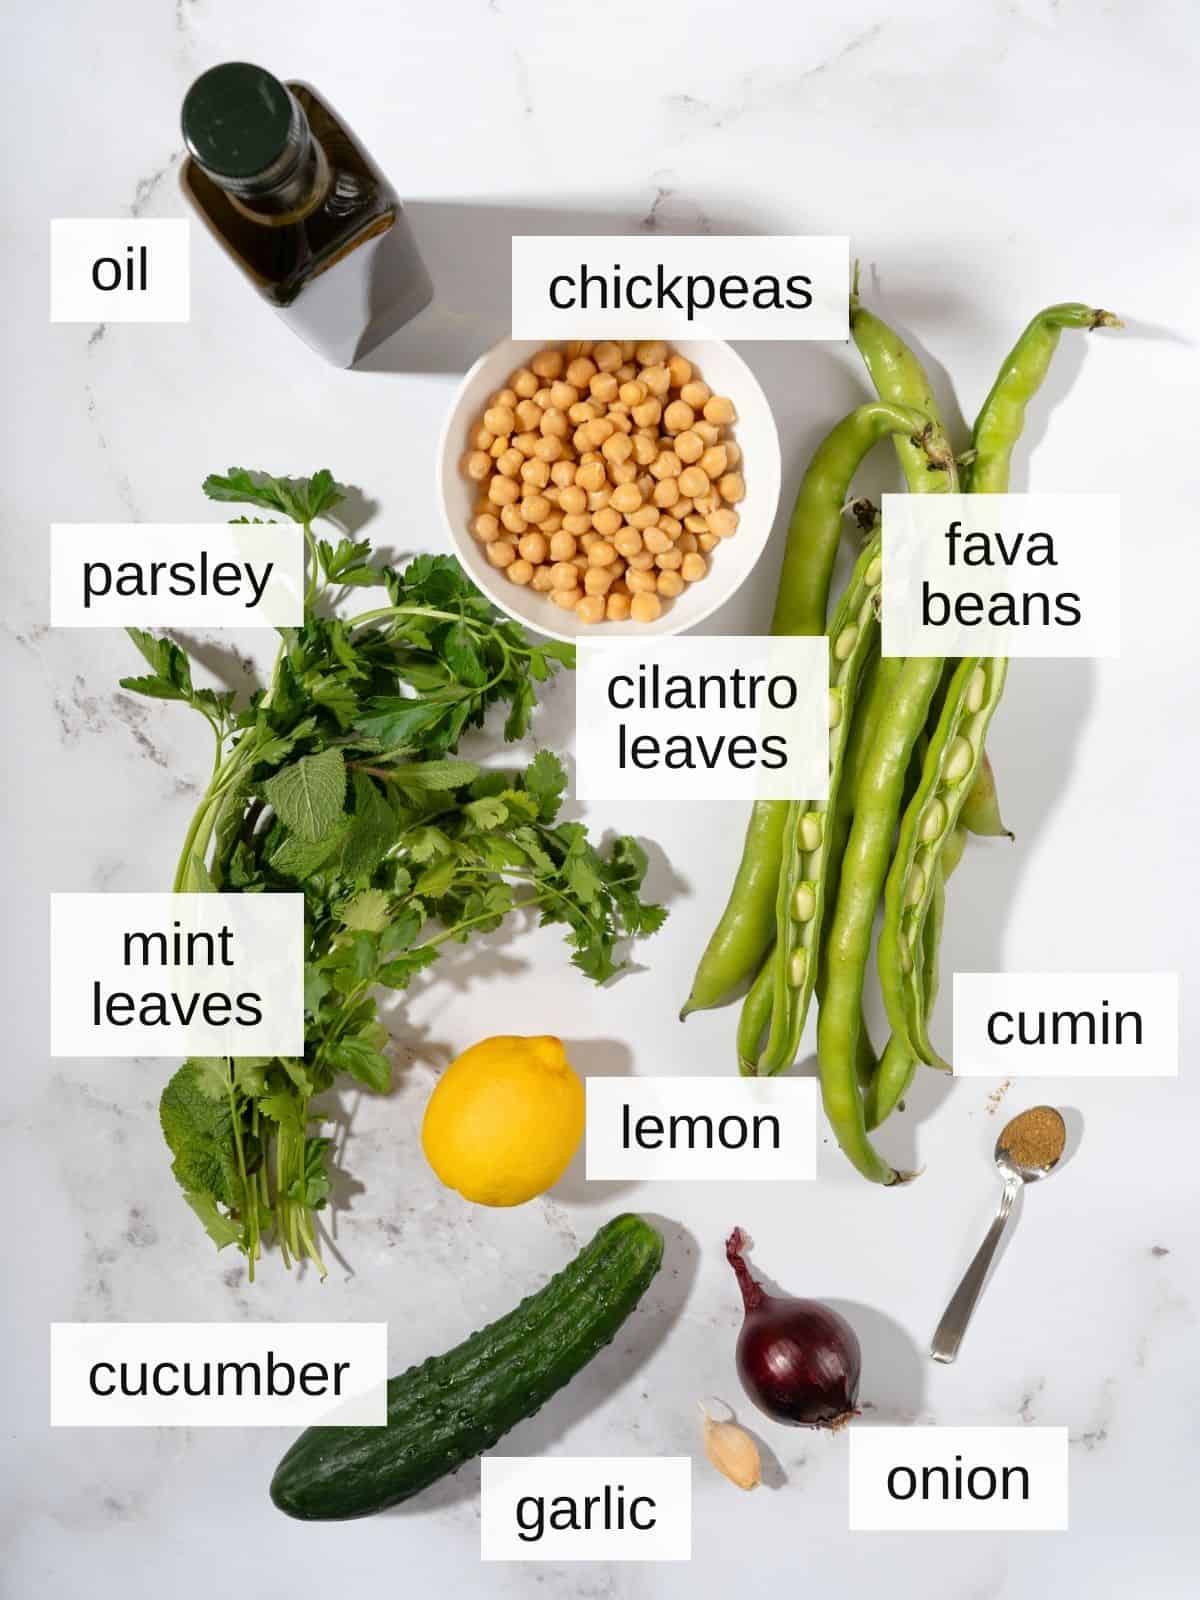 ingredients for fava bean and chickpea salad, including oil, parsley, cilantro leaves, mint leaves, lemon, cumin, cucumber, garlic, onion, chickpeas, and fava beans.